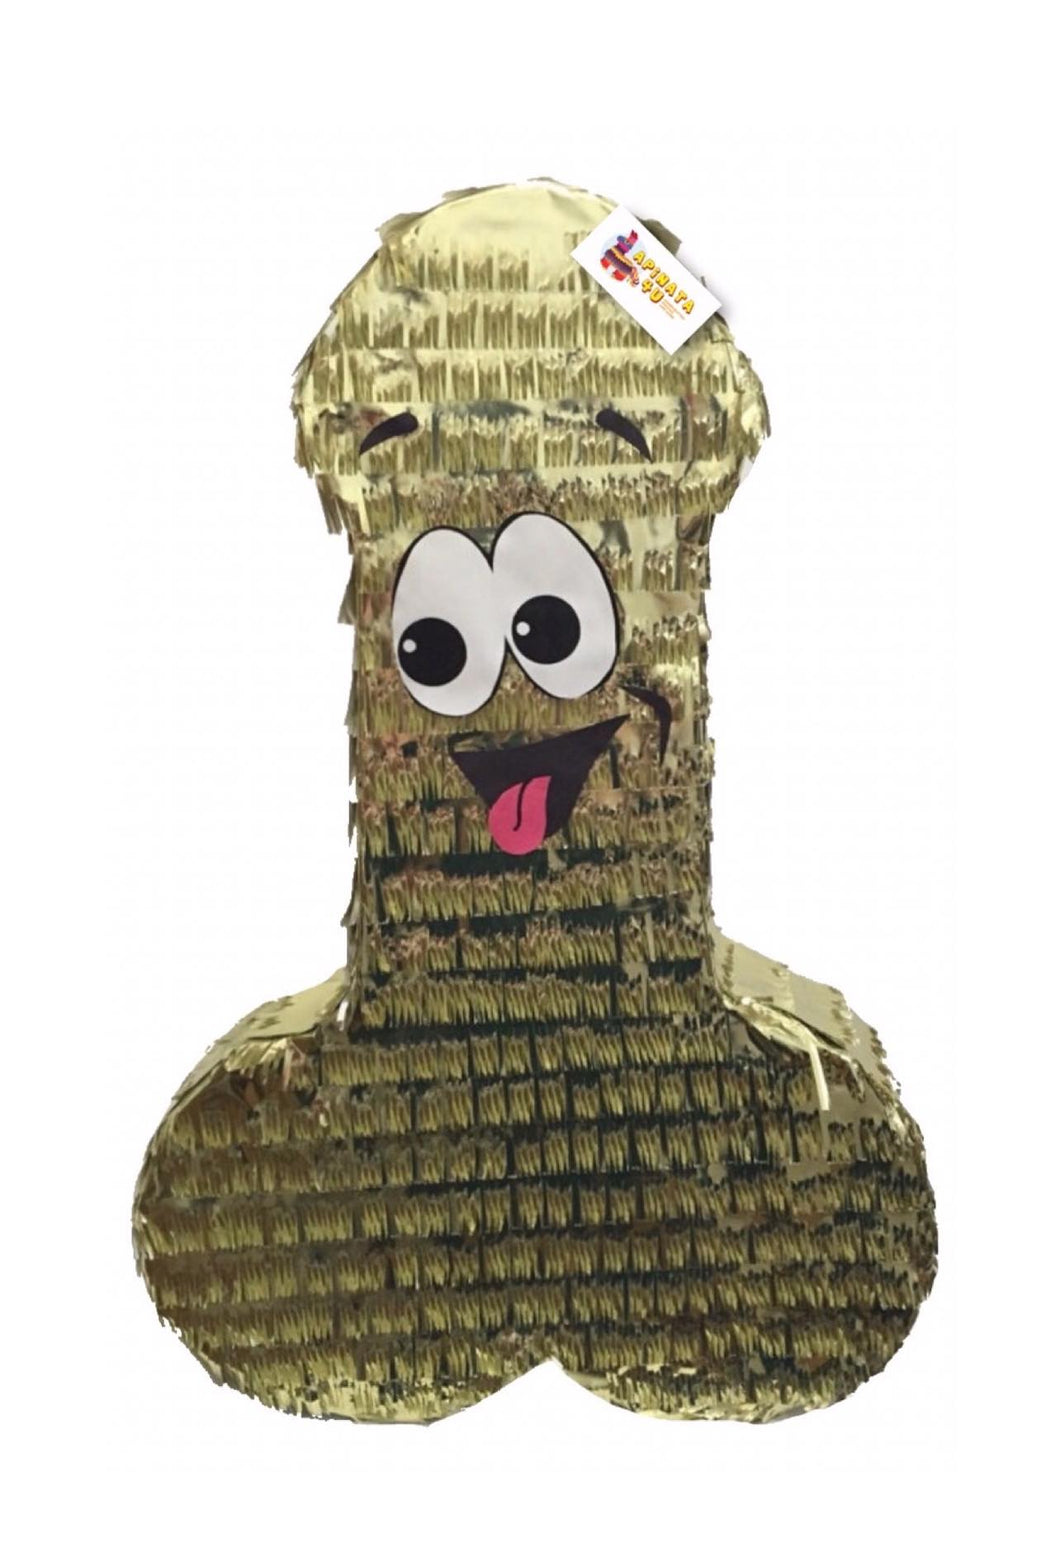 APINATA4U LLC - Penis Adult Pinata |Gold Color | Ideal for Bachelorette Party | Made with High Quality Cardboard | for Fun, Party & Game | Size - 20